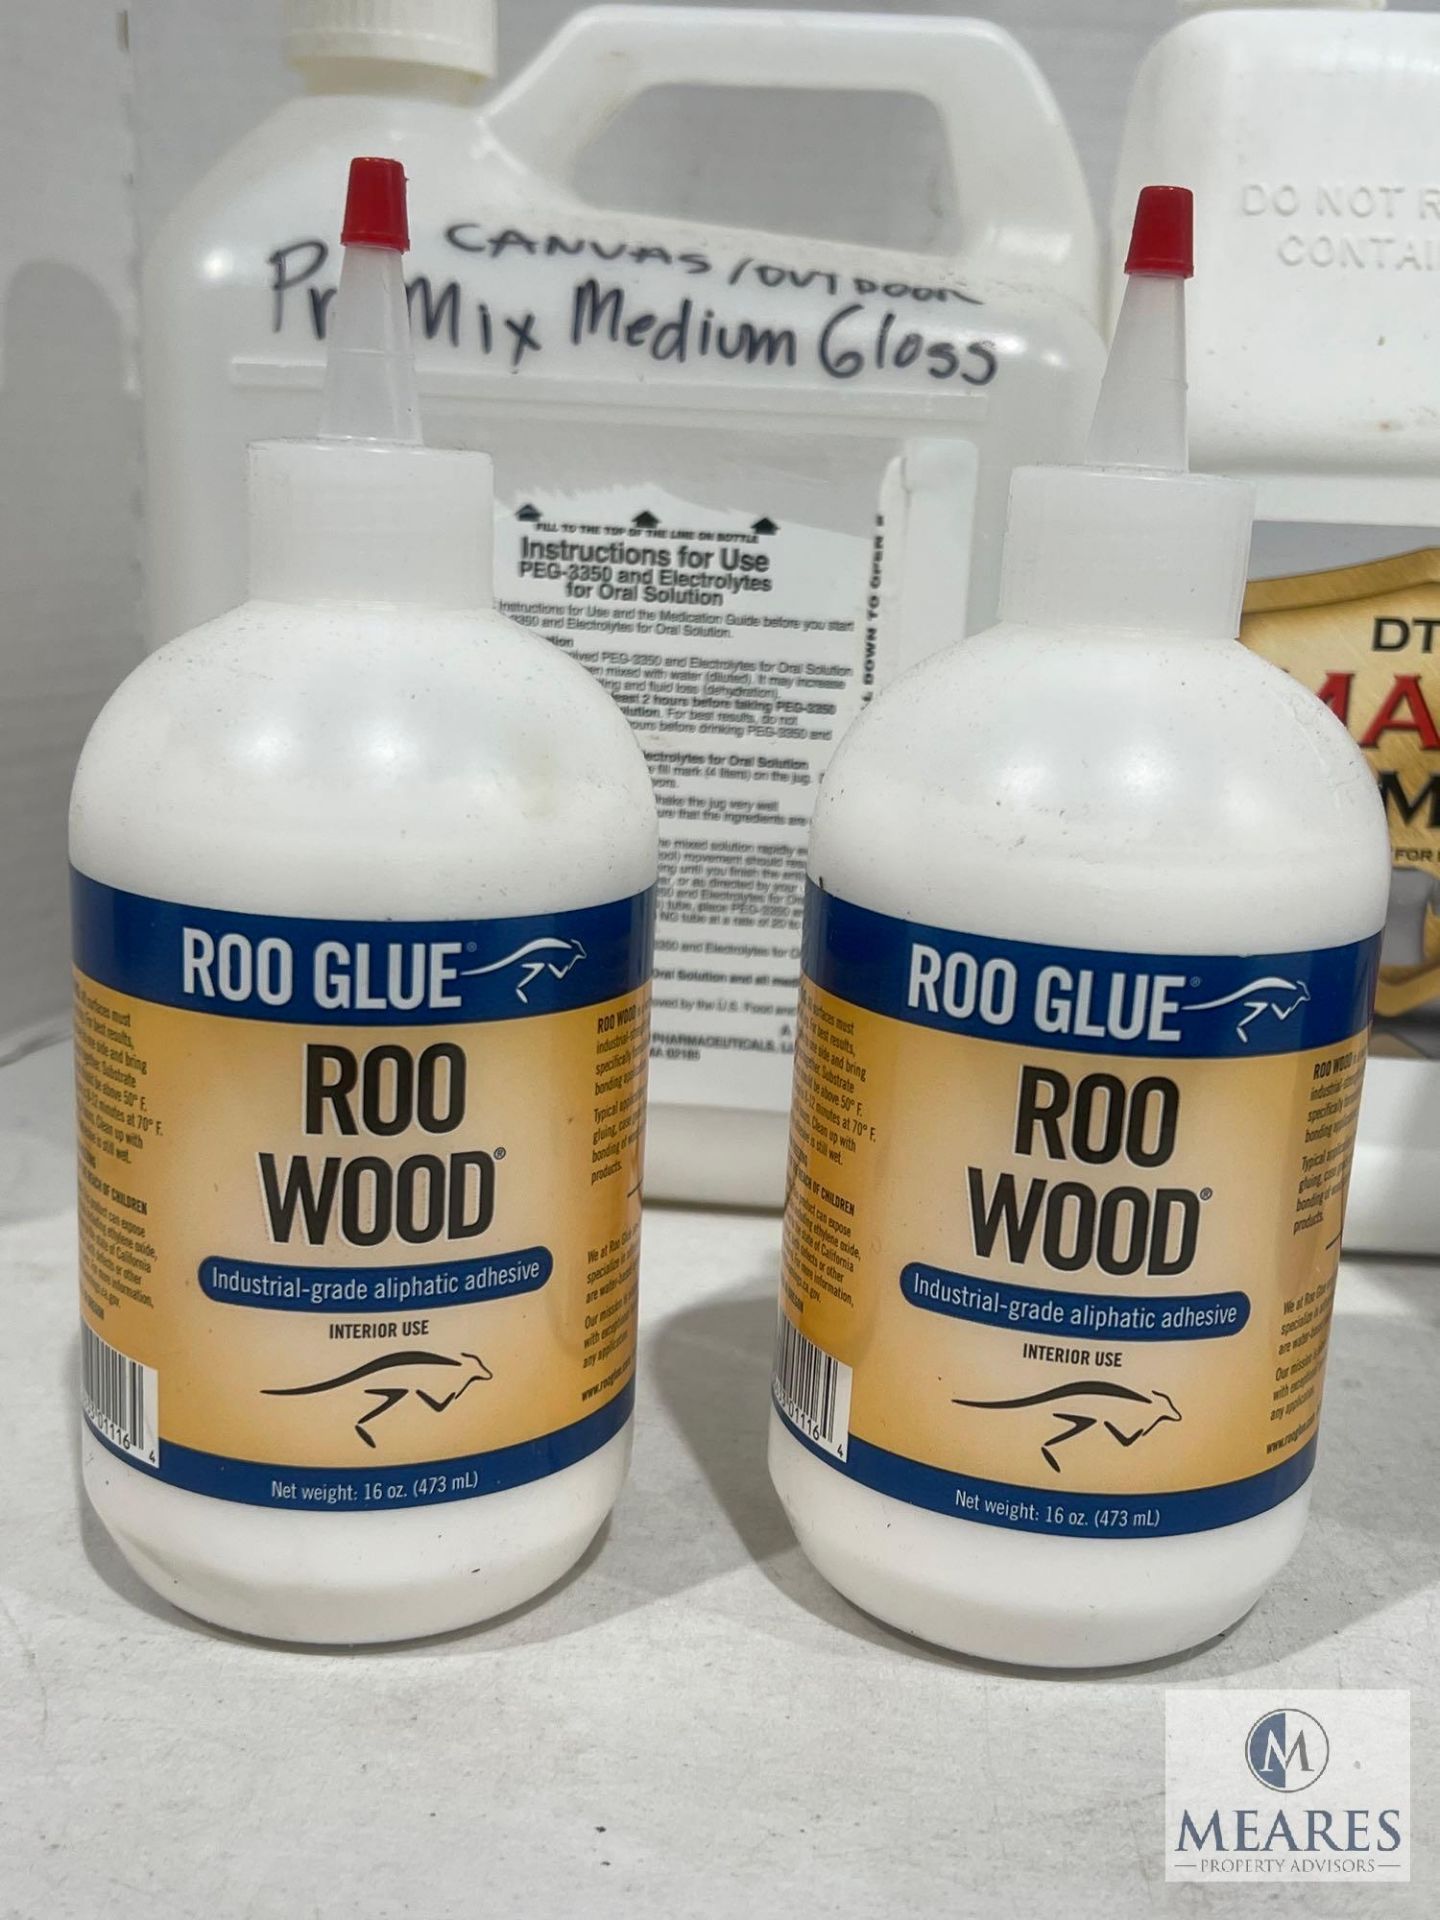 Pretreatment Supplies and Roo Wood Glue - Image 2 of 6